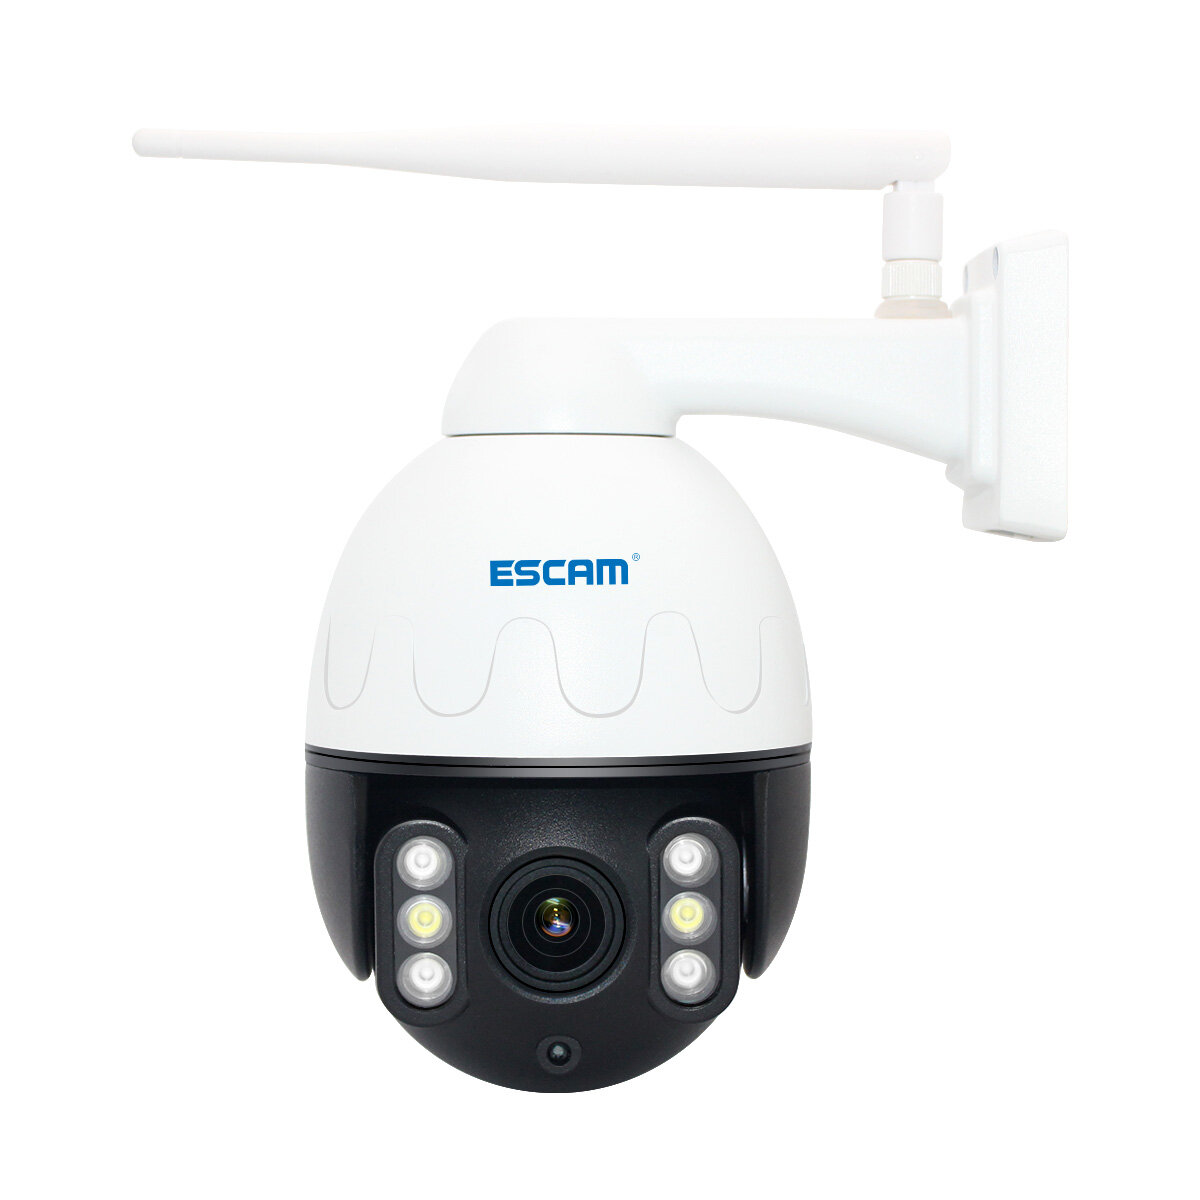 Image of ESCAM Q2068 1080P Metal Case WiFi Waterproof IP Camera Support ONVIF Pan Tilt Two Way Talk IR Night Vision Security Came